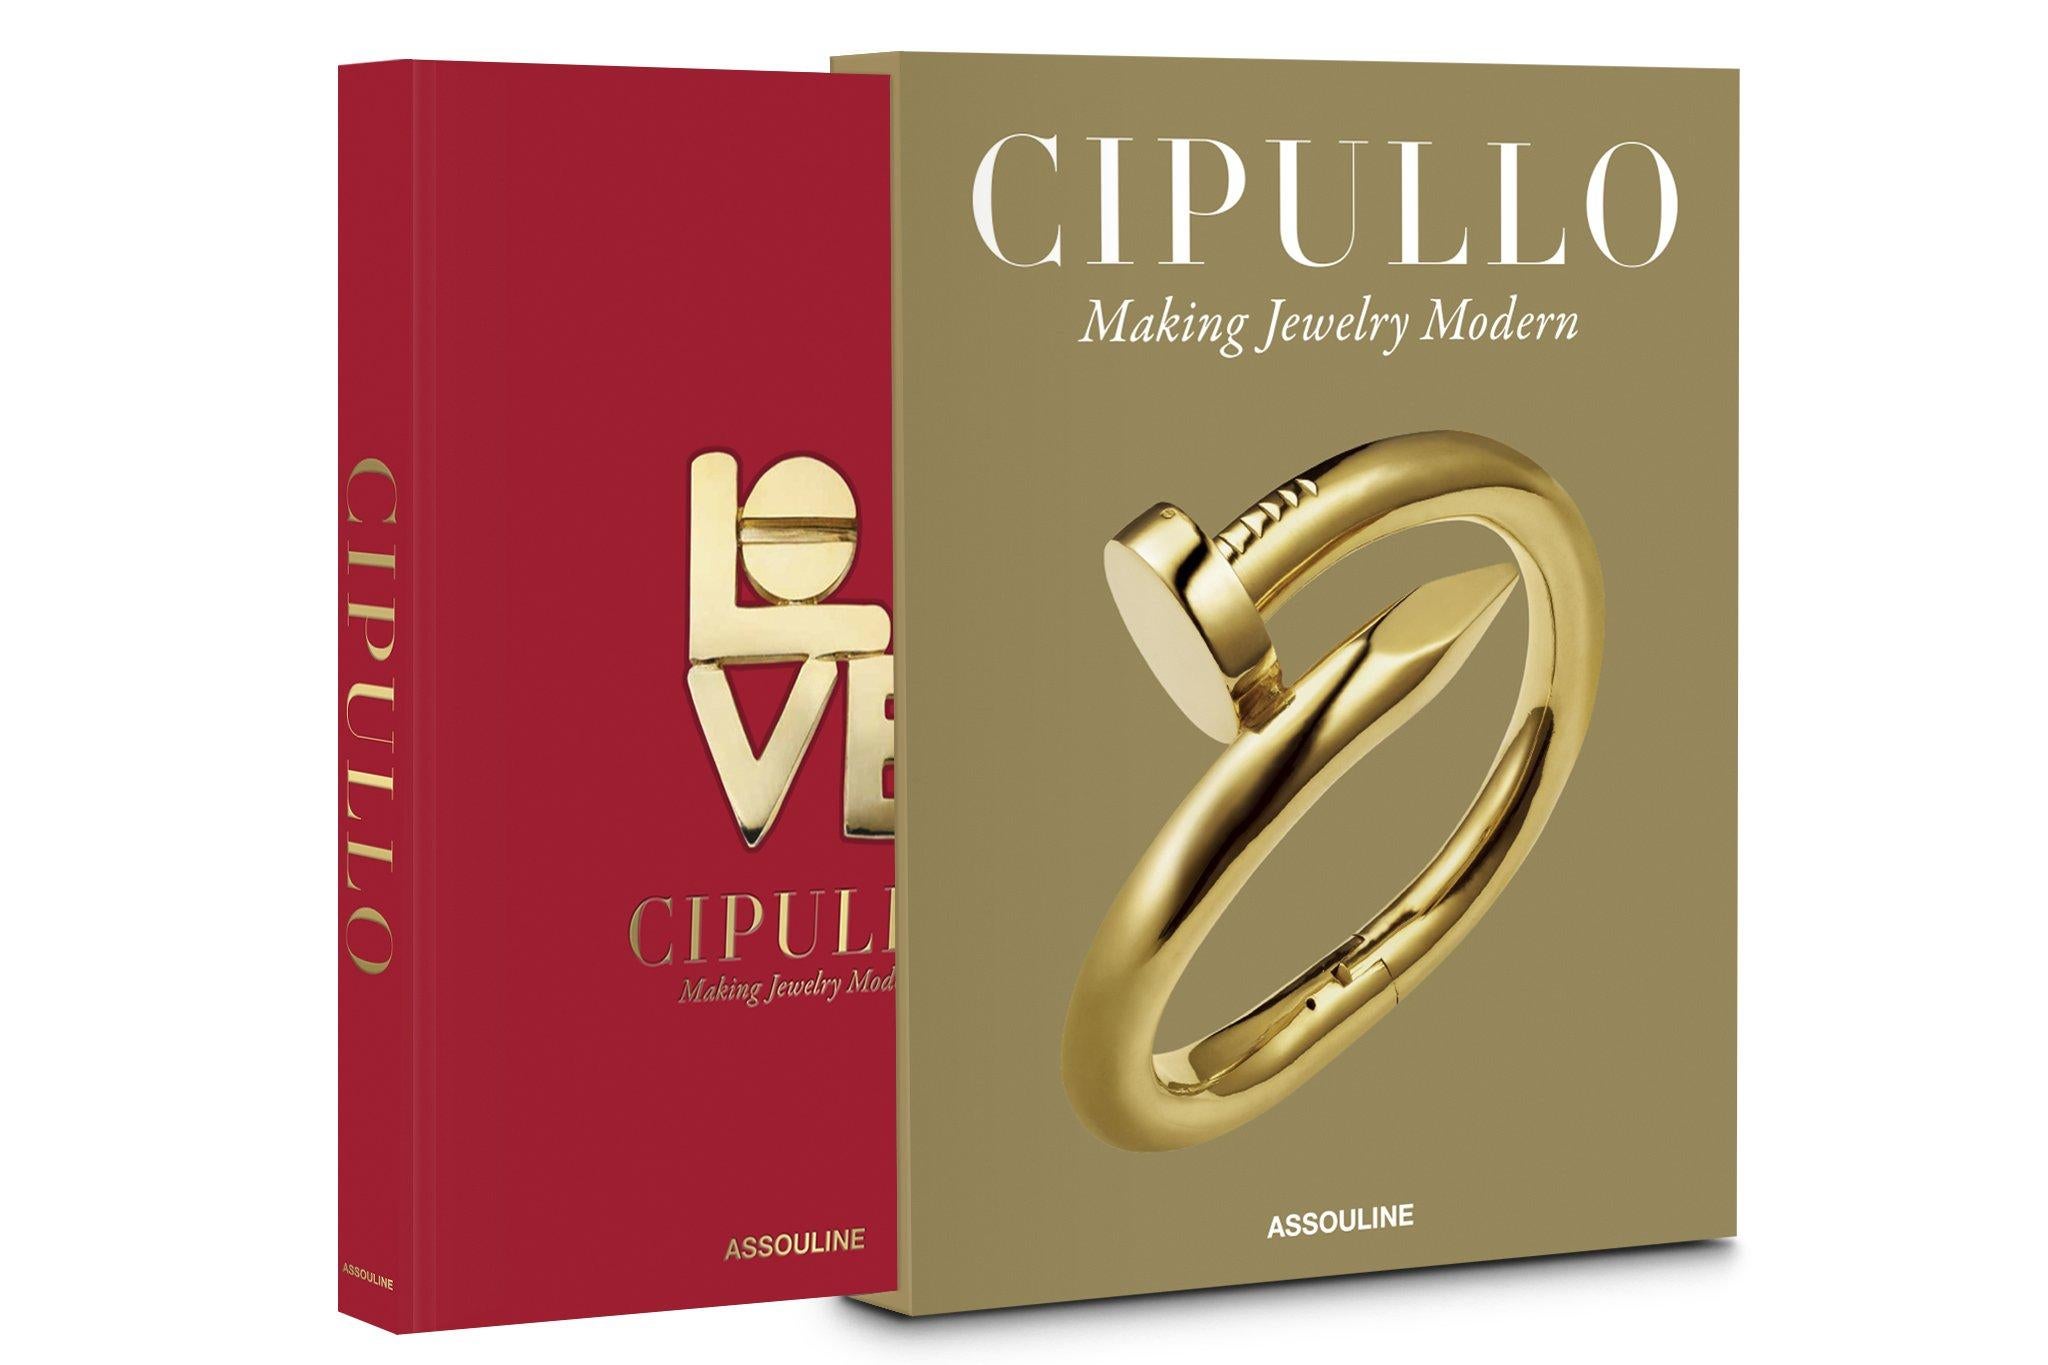 Other Cipullo Making Jewelry Modern